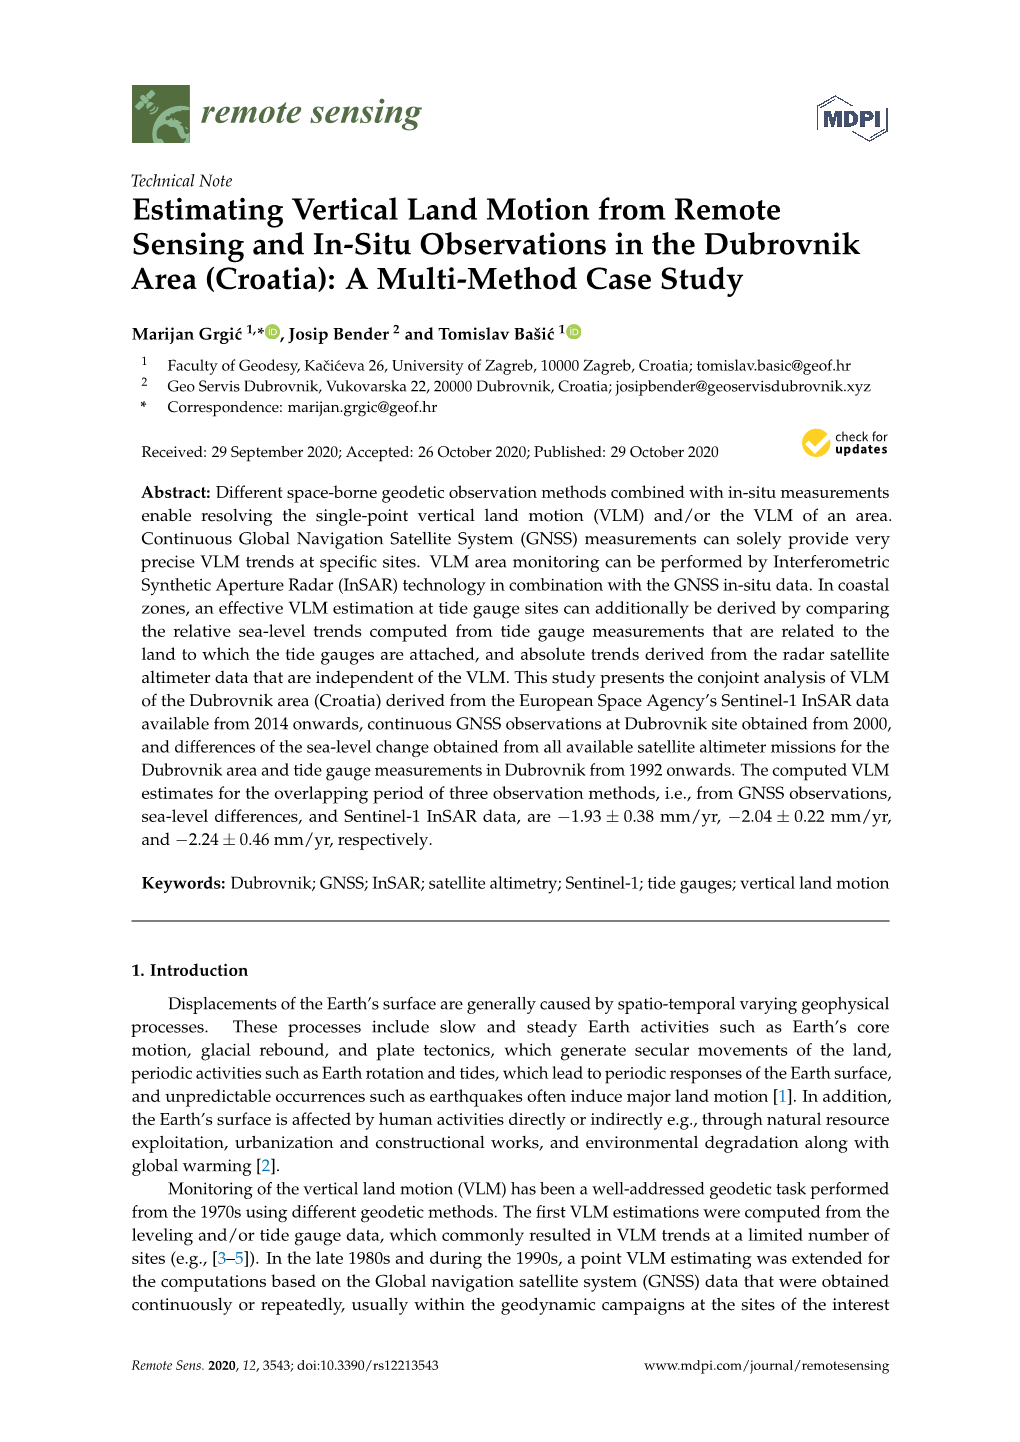 Estimating Vertical Land Motion from Remote Sensing and In-Situ Observations in the Dubrovnik Area (Croatia): a Multi-Method Case Study